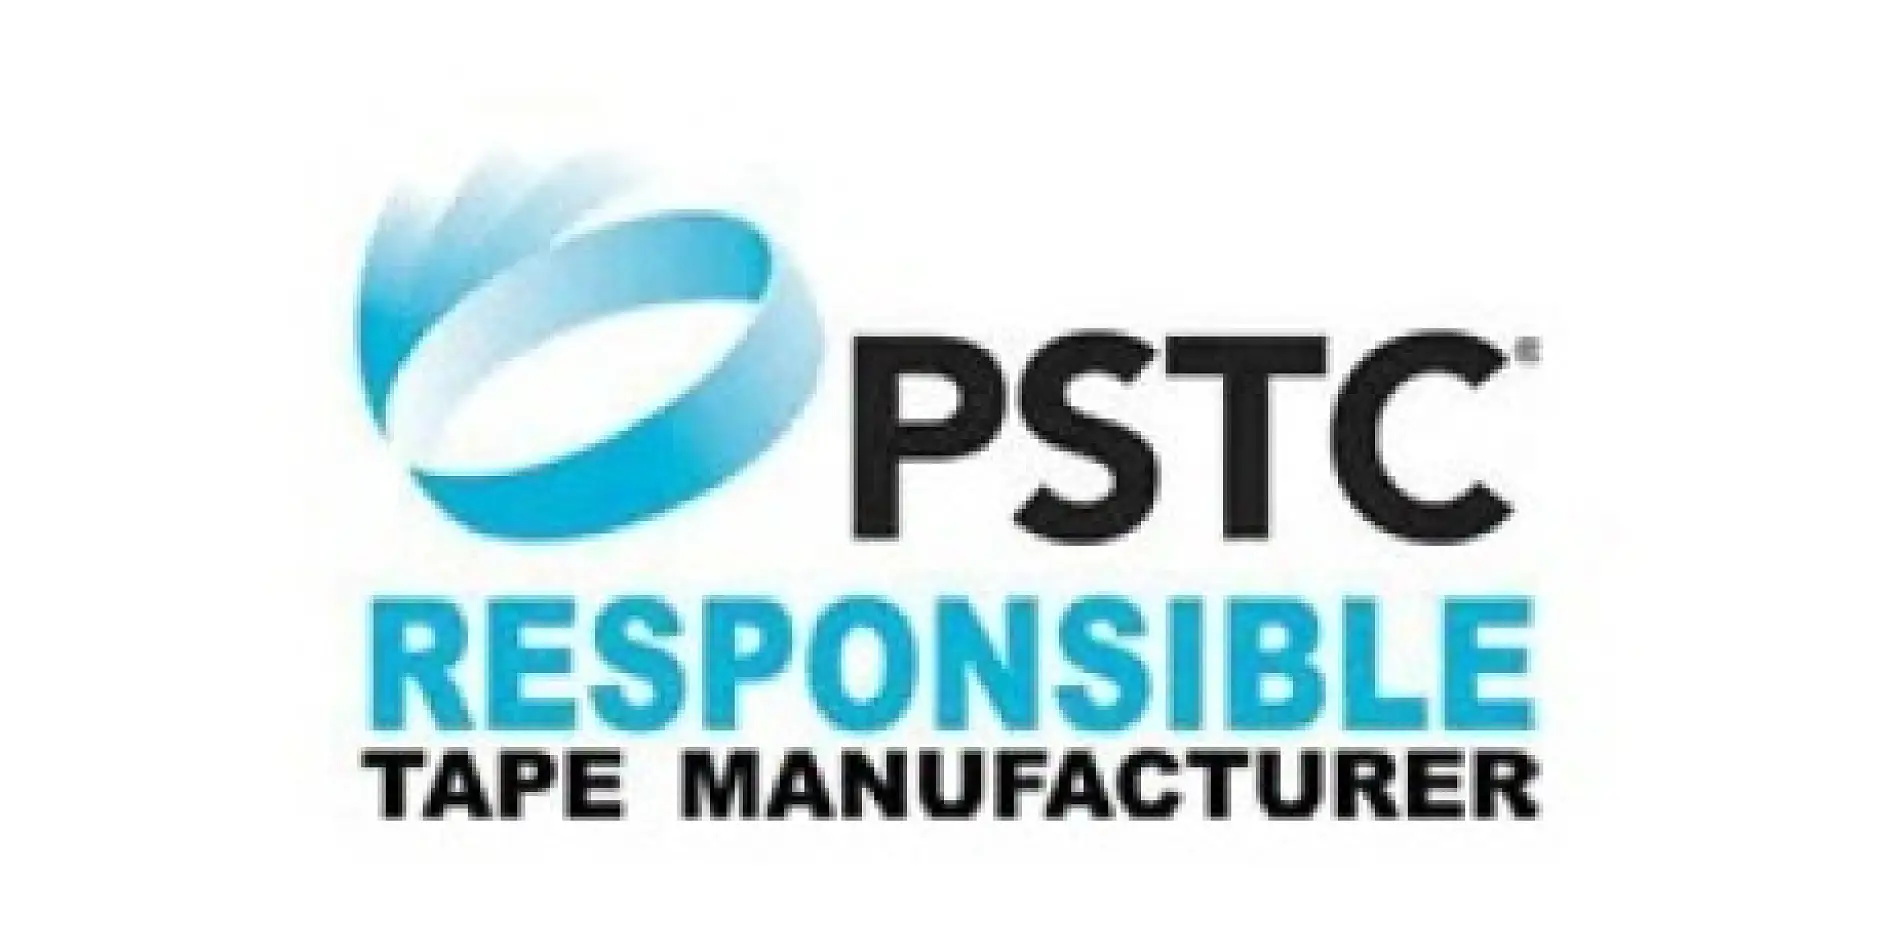 The Pressure Sensitive Tape Council (PSTC) is a not-for-profit, 60-year old, North American trade association for tape manufacturers and affiliate suppliers, dedicated to helping the industry produce quality pressure sensitive adhesive tape products in the global marketplace.